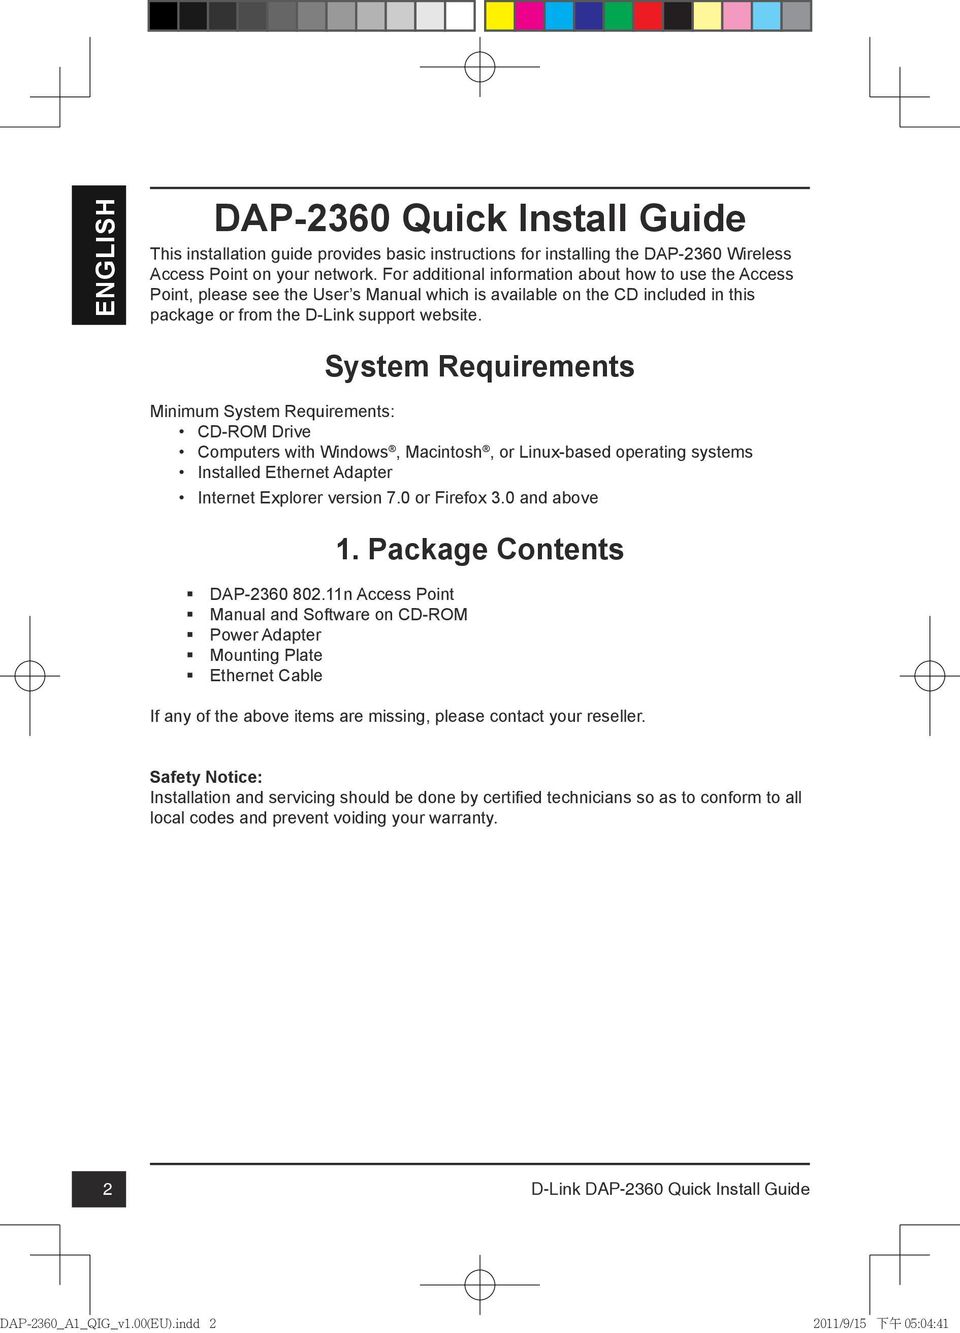 System Requirements Minimum System Requirements: CD-ROM Drive Computers with Windows, Macintosh, or Linux-based operating systems Installed Ethernet Adapter Internet Explorer version 7.0 or Firefox 3.